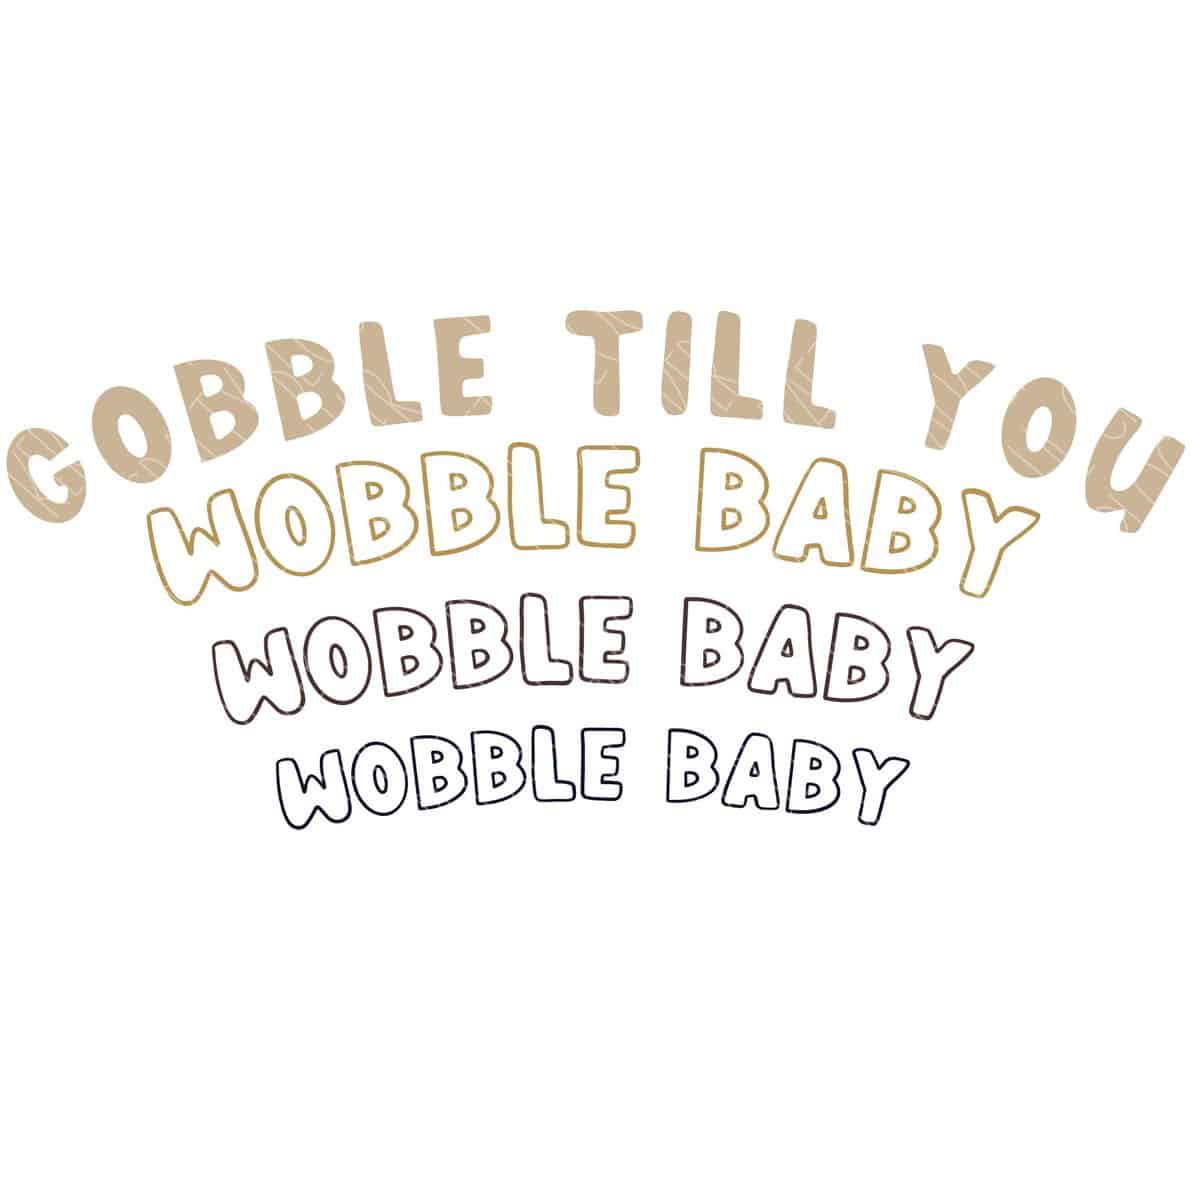 Wobble Baby SVG	

			
		
	

		
			$3.00 – Buy Now Checkout
							
					
						
							
						
						Added to cart